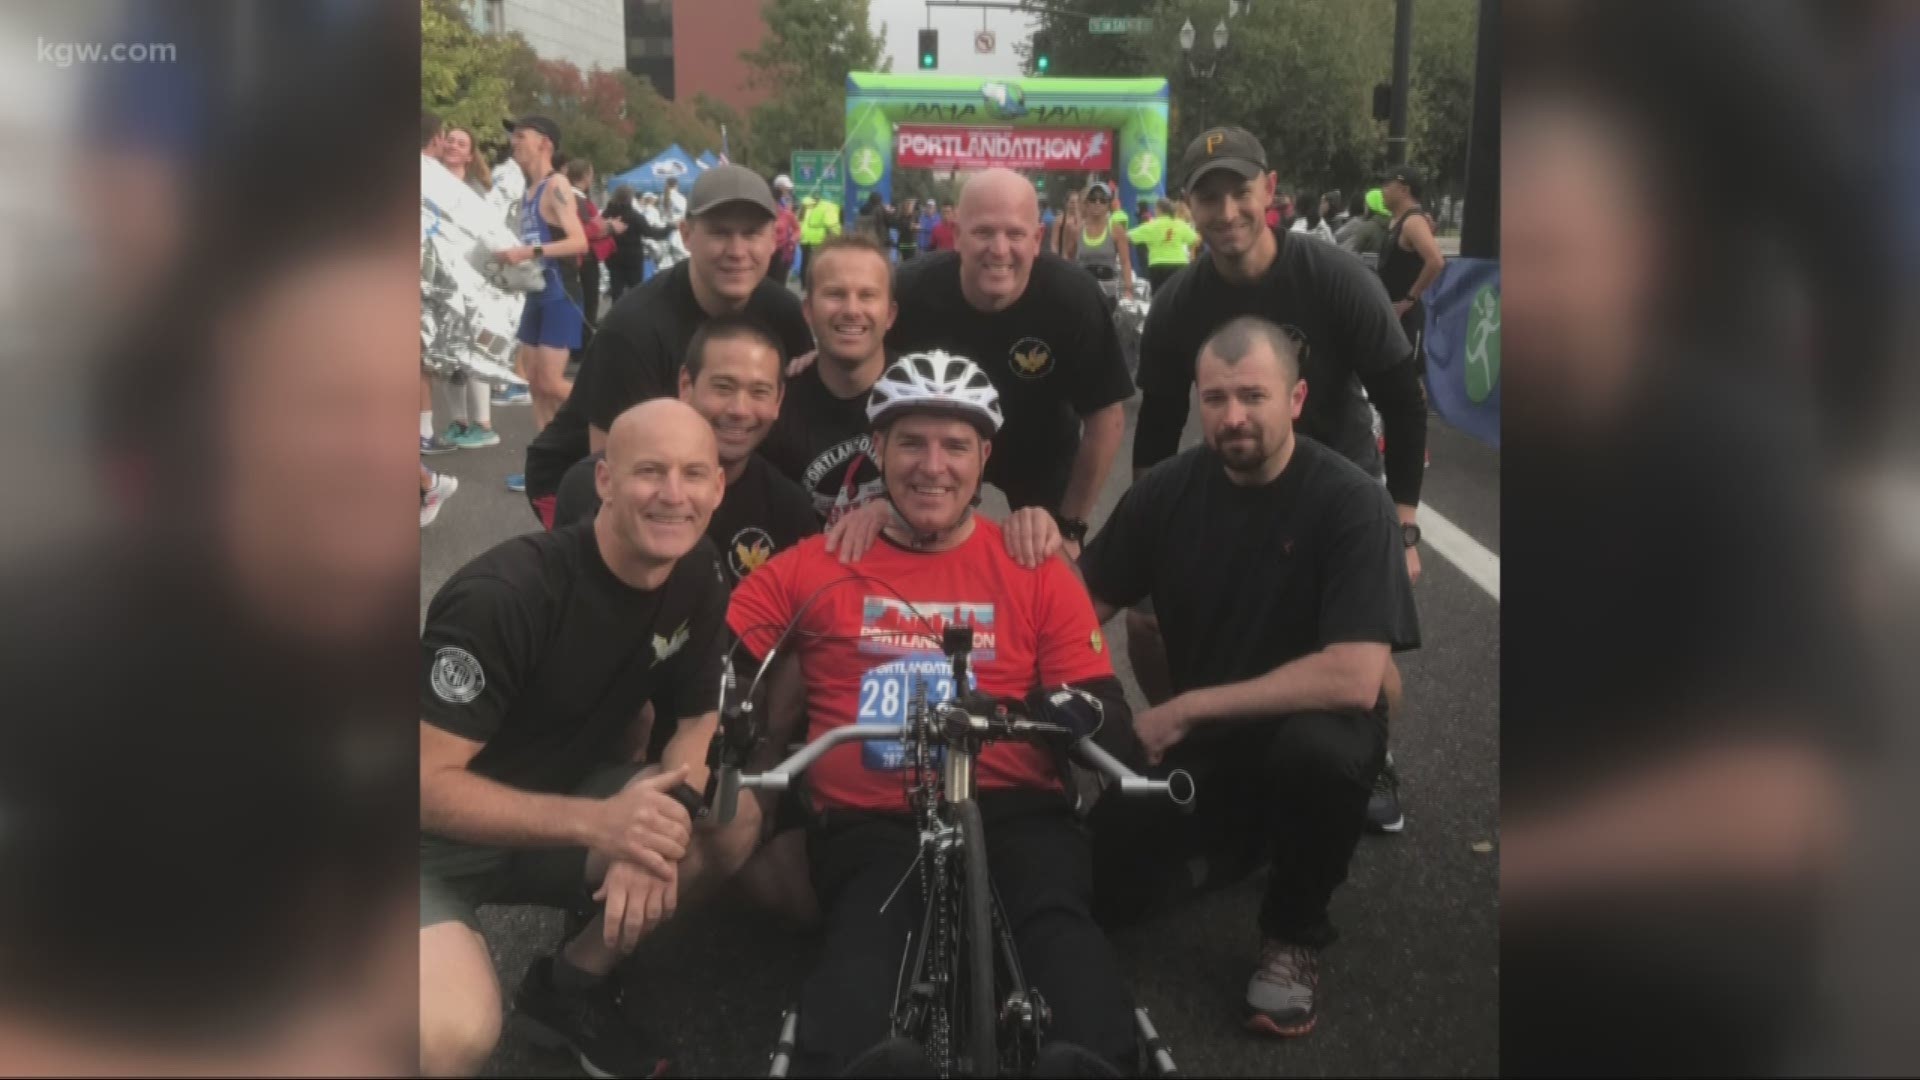 Portland Police Sgt. Paul Meyer, the first Portland police officer who uses a wheelchair to become a sergeant, took part in the Portlandathon half-marathon Sunday, and his Swat Team buddies were there to surprise him by joining him for the last mile of th